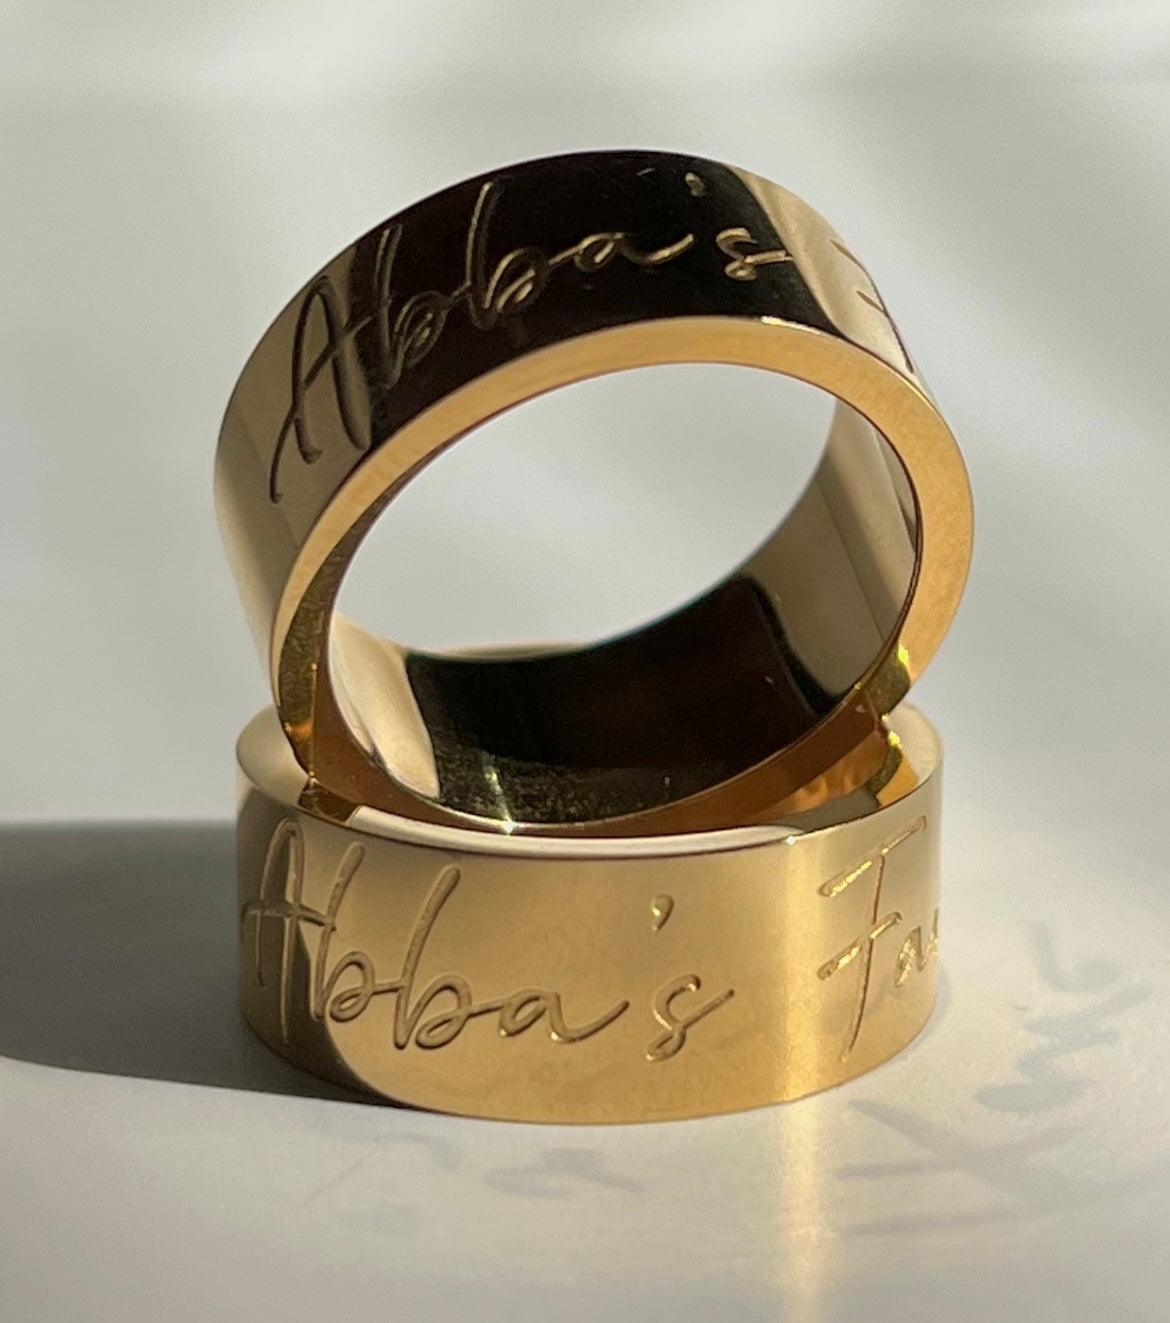 "Abba's Fave" Ring